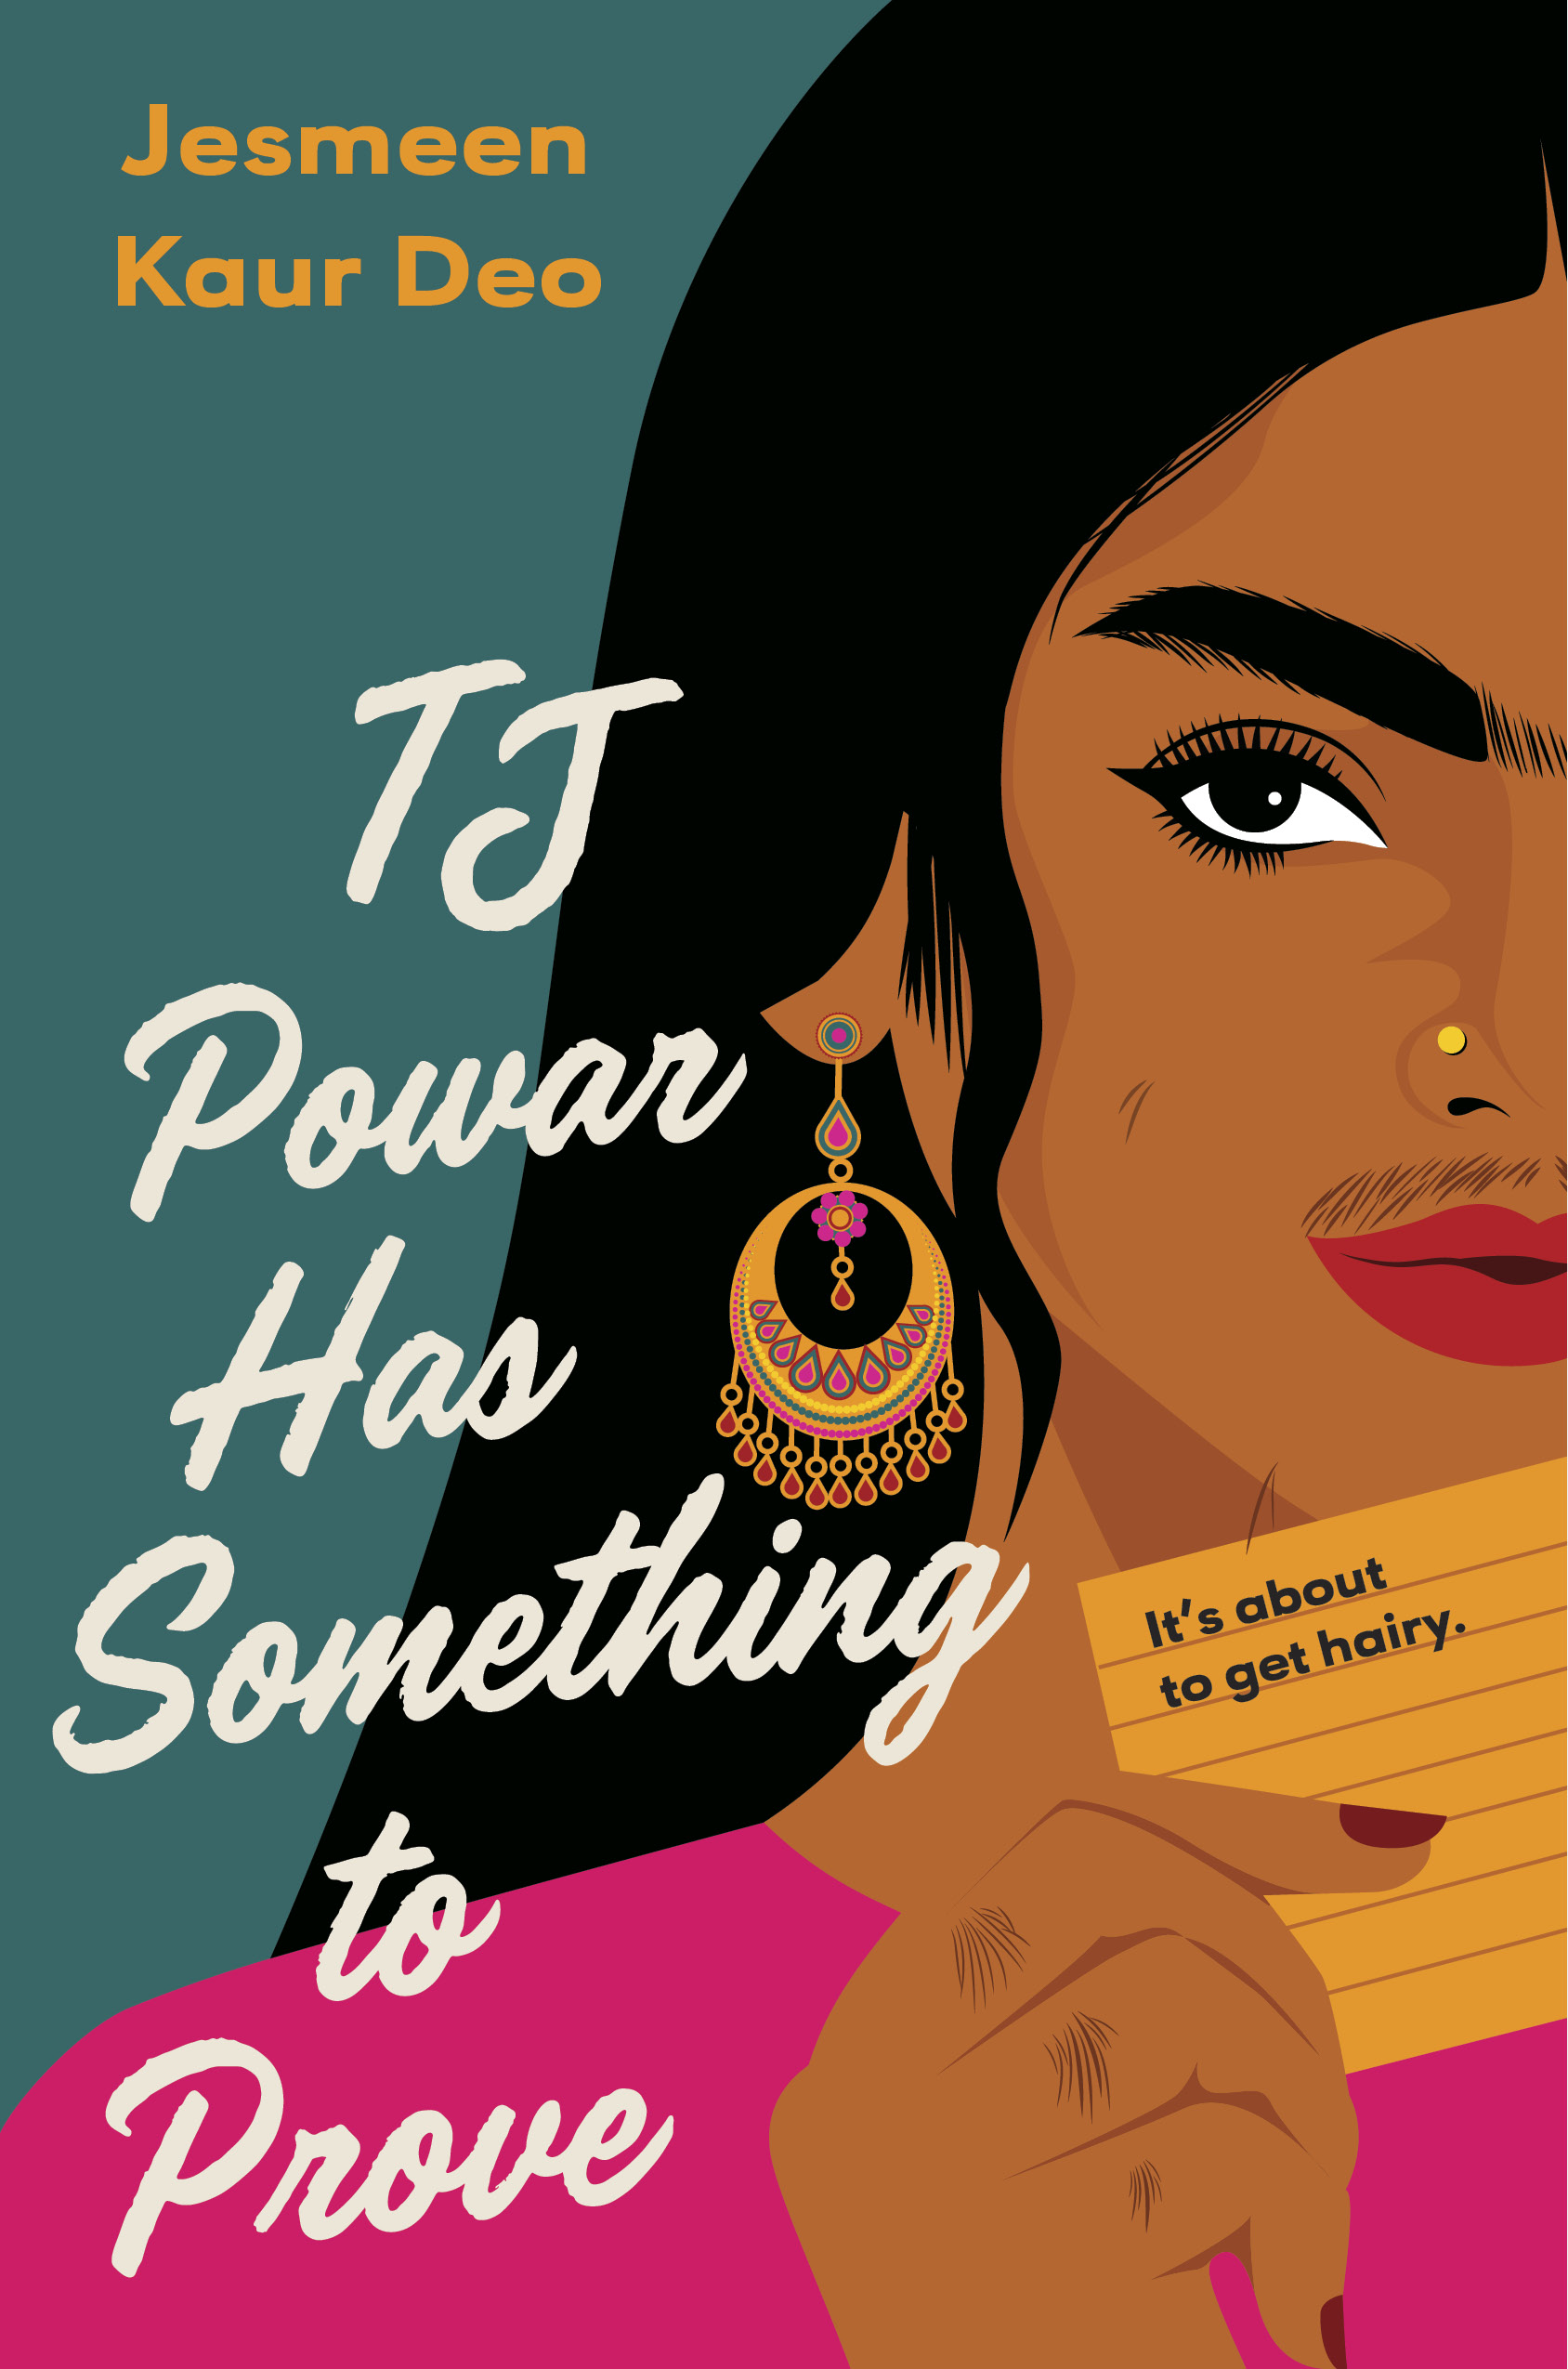 The cover is bright and colorful, with an illustration of TJ Powar smirking at us with her hair down and other hair we don't often see, too—unibrow, mustache, knuckle hair. She's holding up the same kind of cue card one would use for public speaking, where the tagline 'It's about to get hairy.' is written. The book title, TJ Powar has Something to Prove, is written in cursive next to her, as well as author name Jesmeen Kaur Deo.